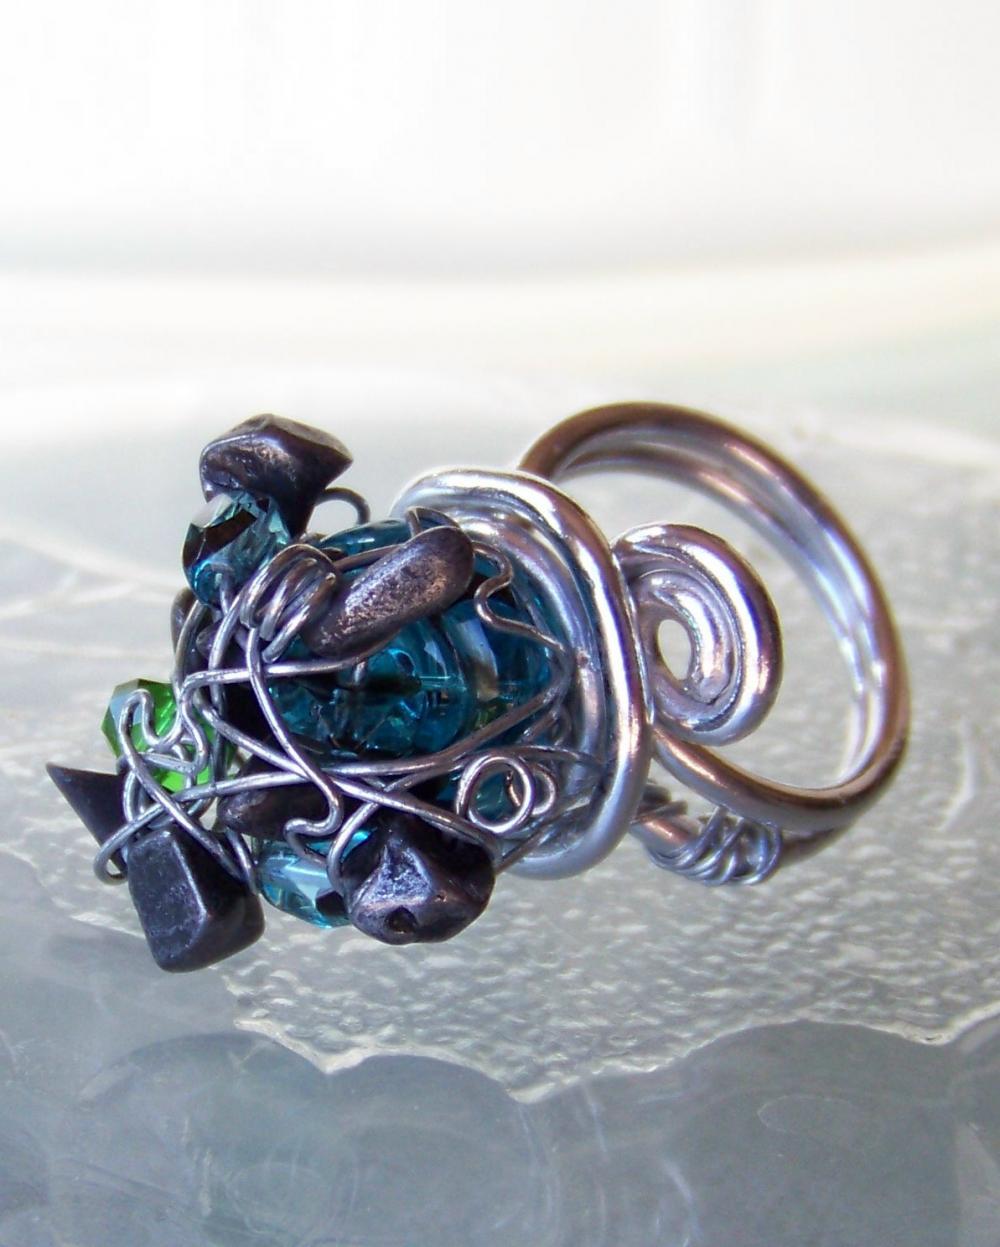 Cocktail Ring Sz 8 - Wire Wrapped Aluminum With Black Stone And Blue Fire Polished Glass